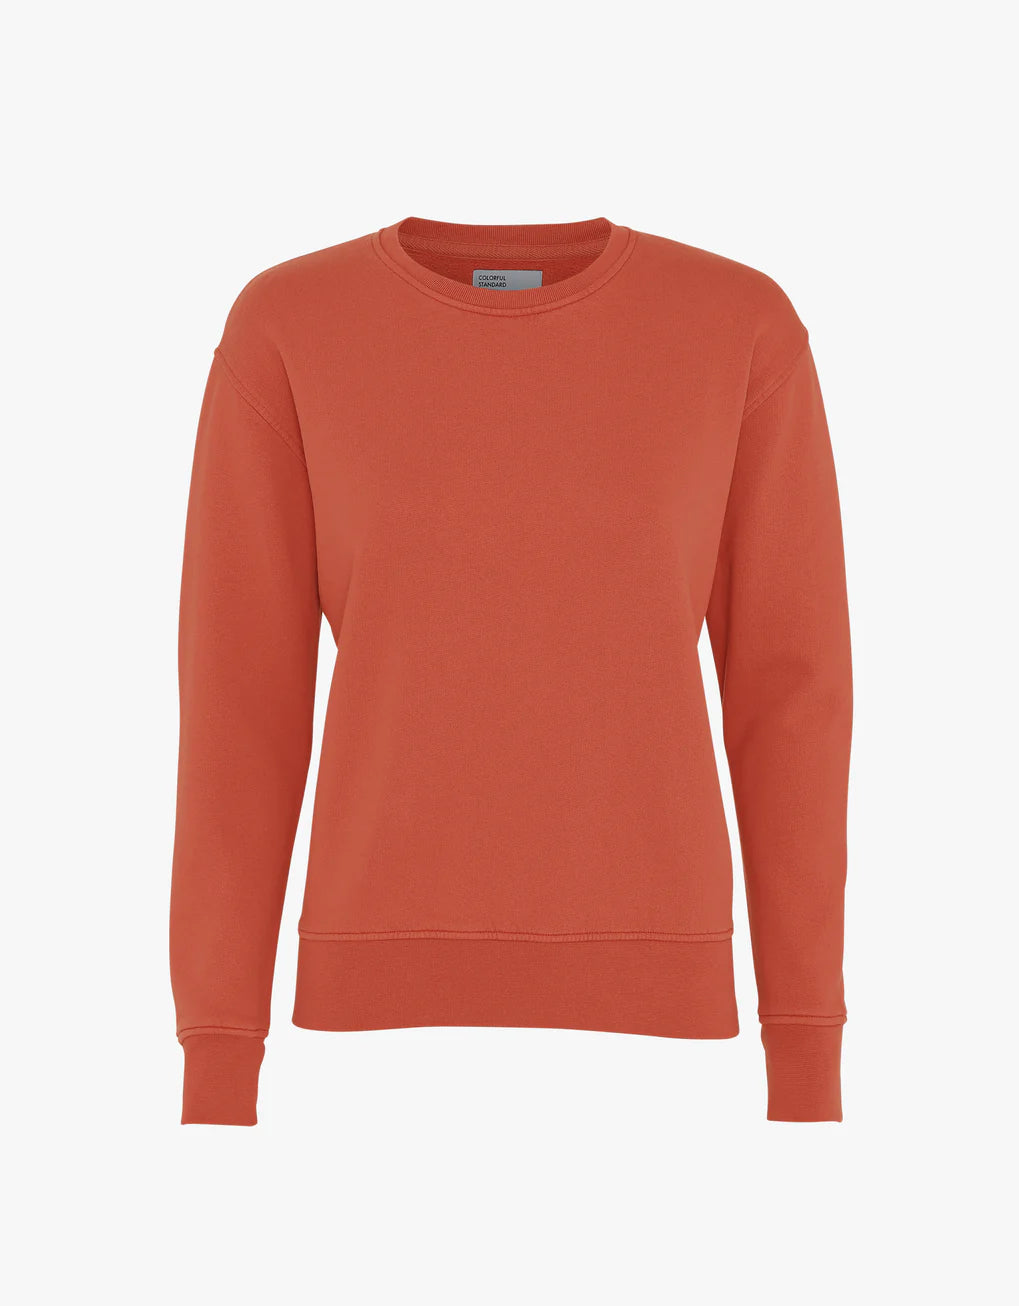 A Colorful Standard Classic Organic Crew sweatshirt in a red color, made from organic cotton and is machine washable.